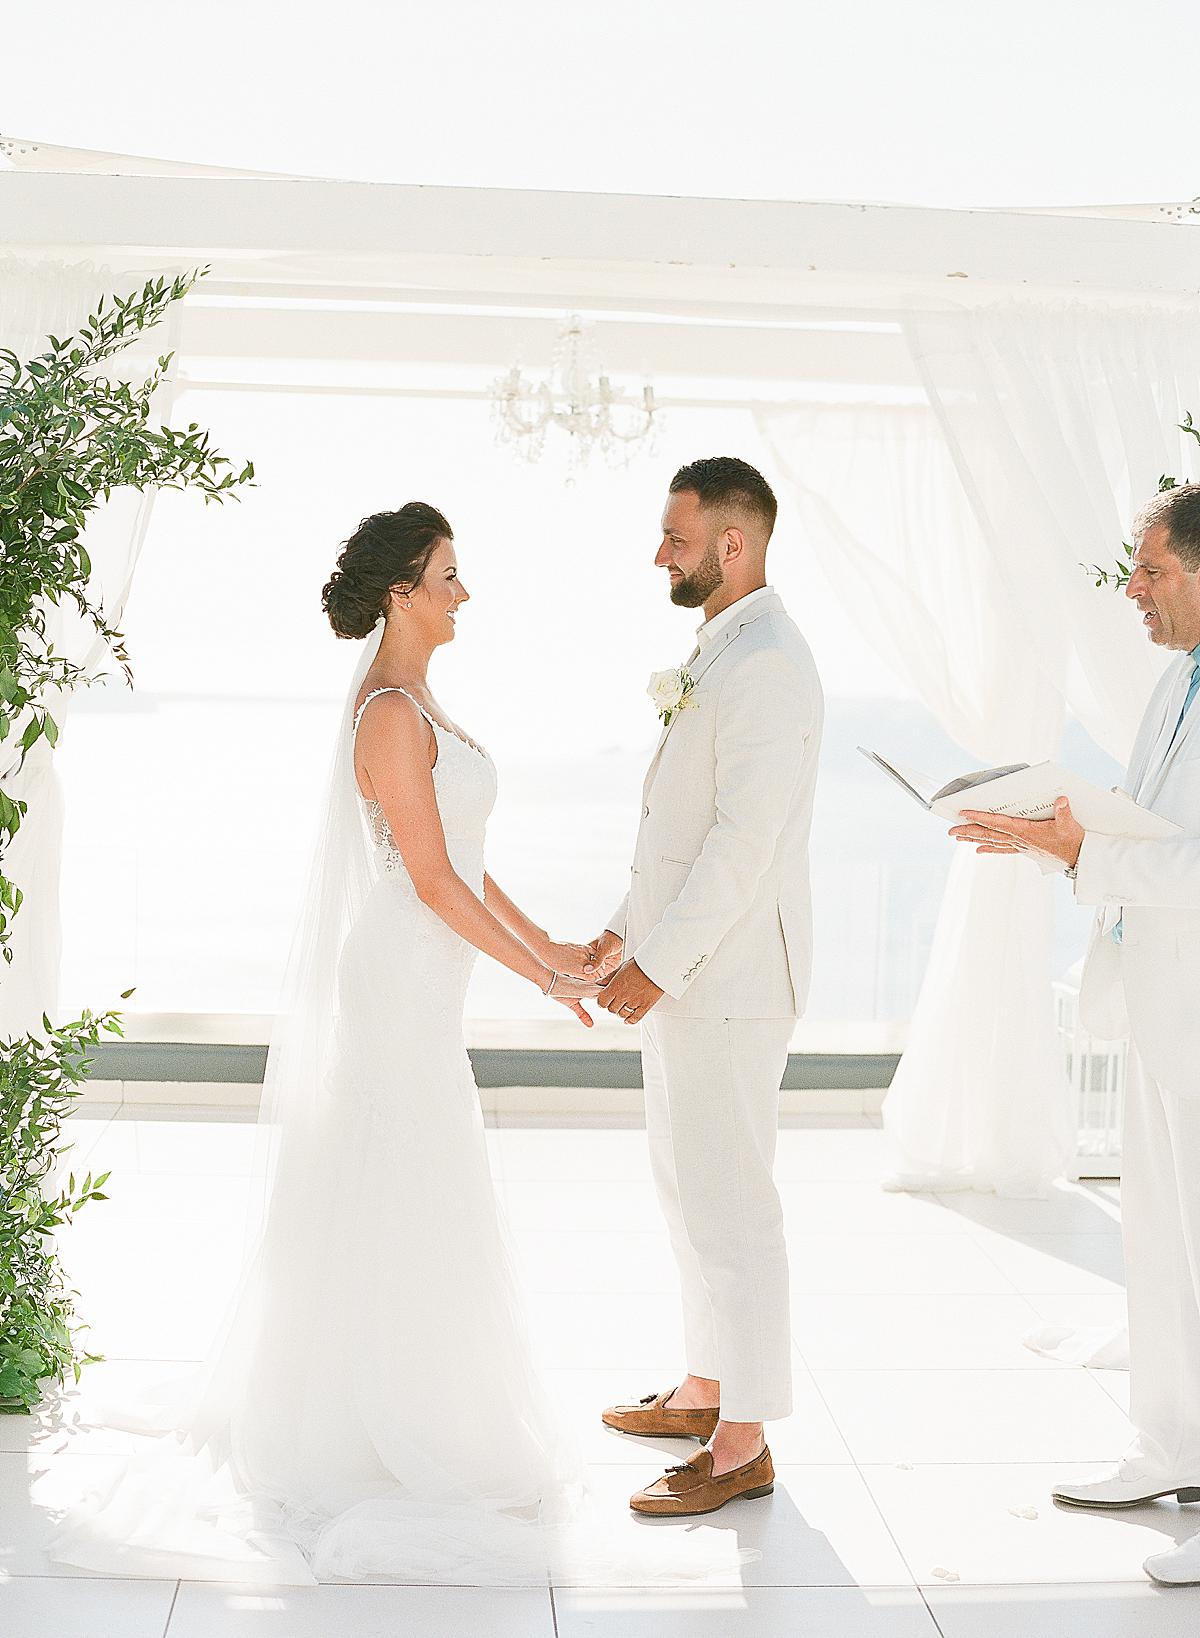 bride and groom exchanging vows at santorini wedding